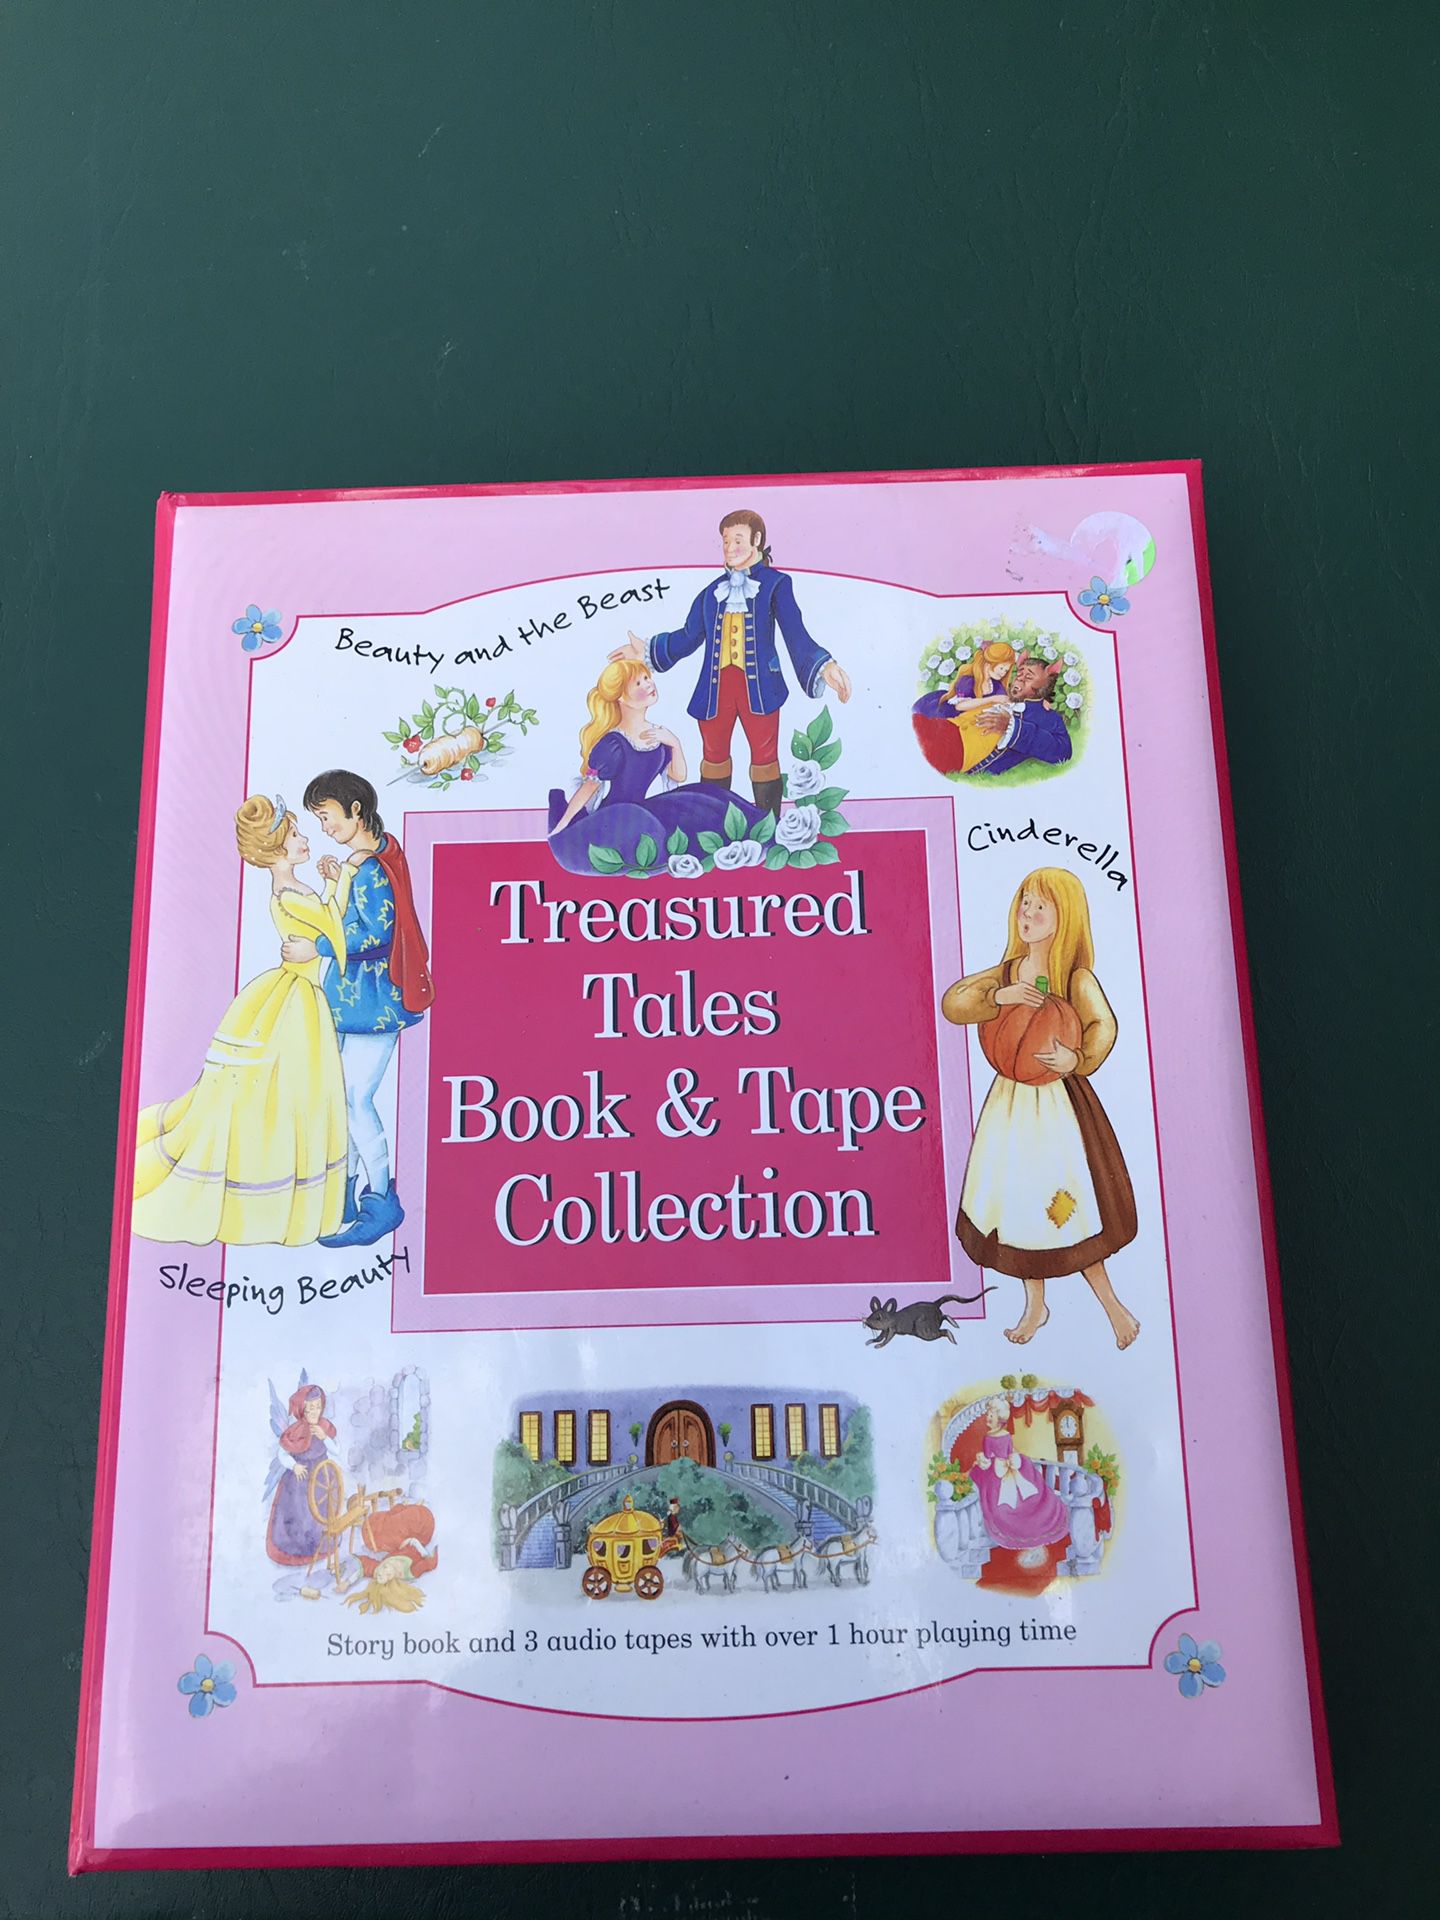 Treasured Tales book/tape collection